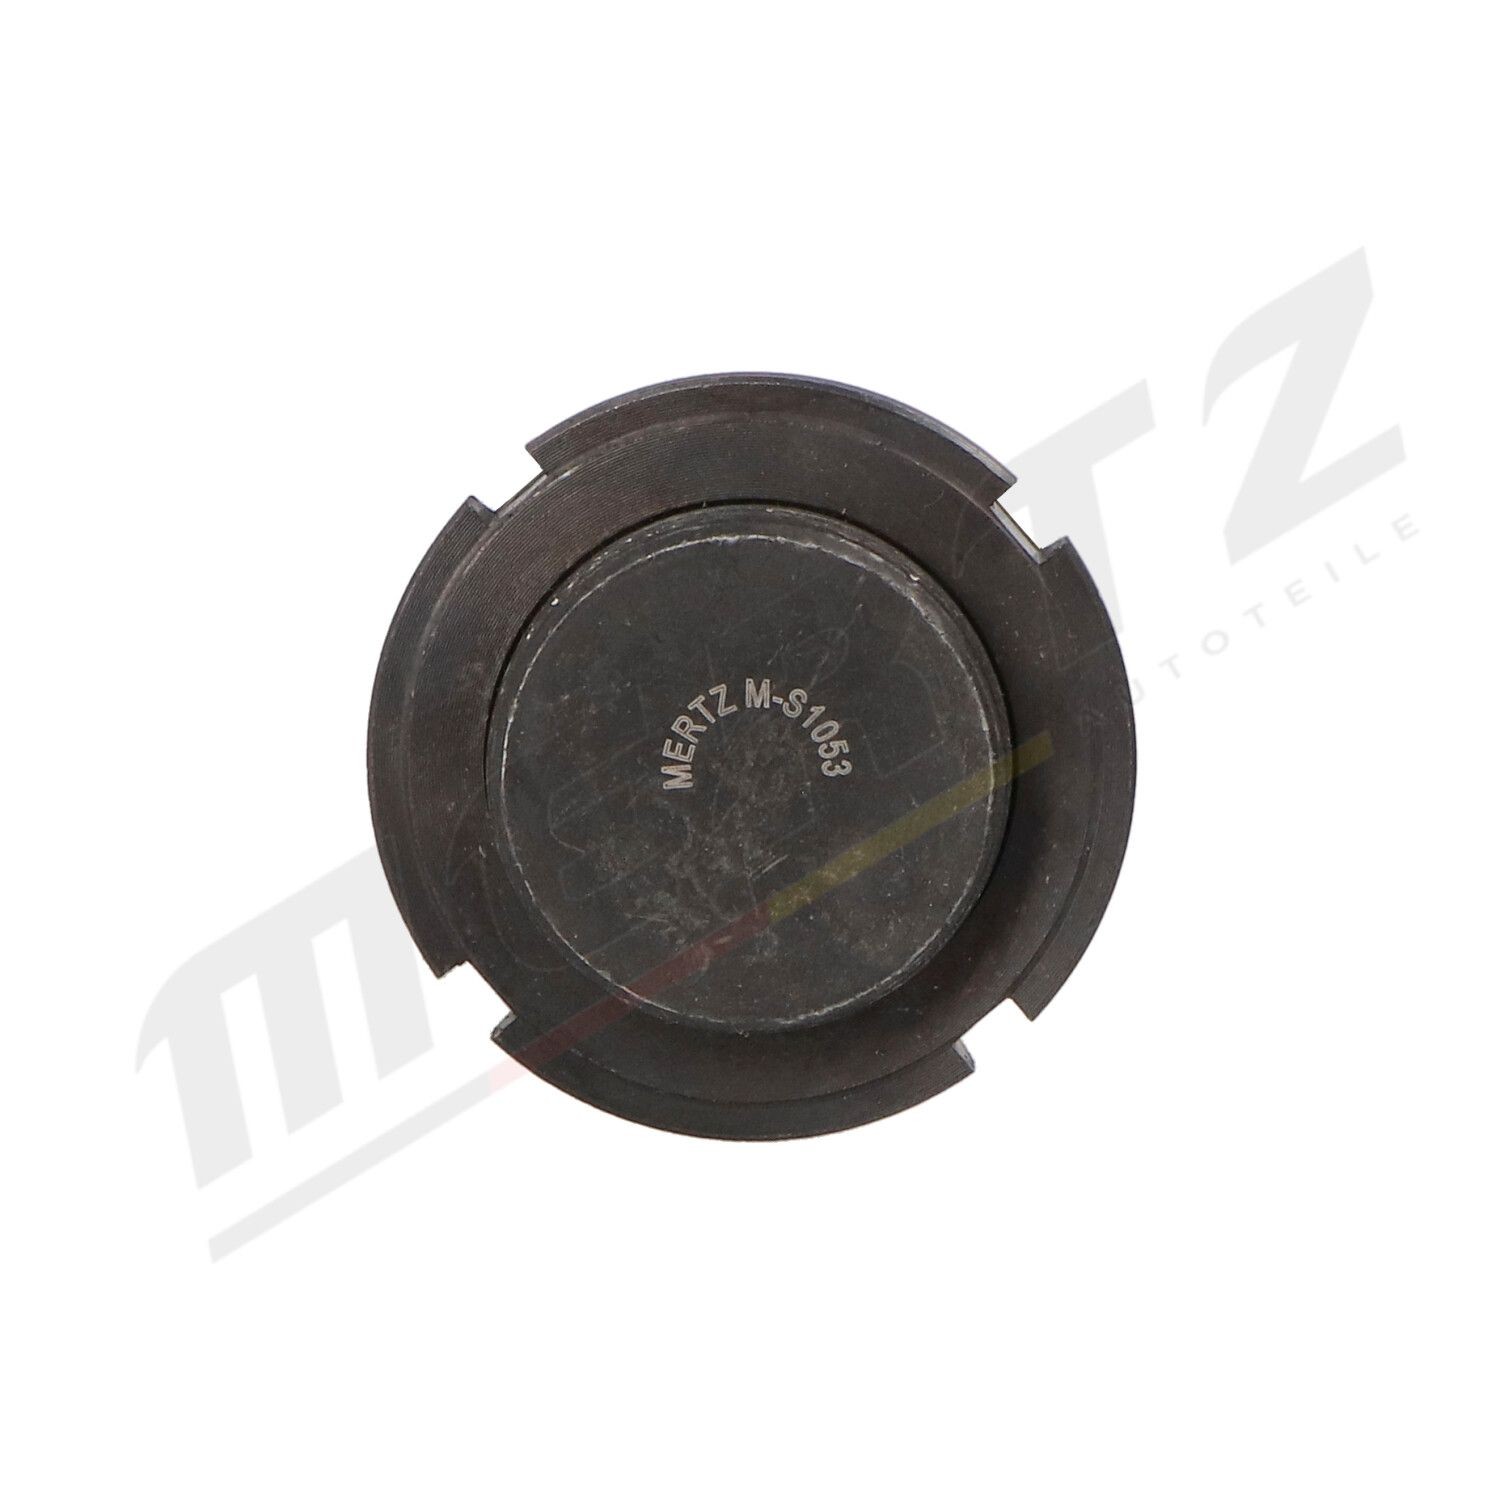 M-S1053 Suspension ball joint M-S1053 MERTZ Front Axle Left, Front Axle Right, Lower, with nut, 19,2mm, M16x1,5, M42x1,5mm